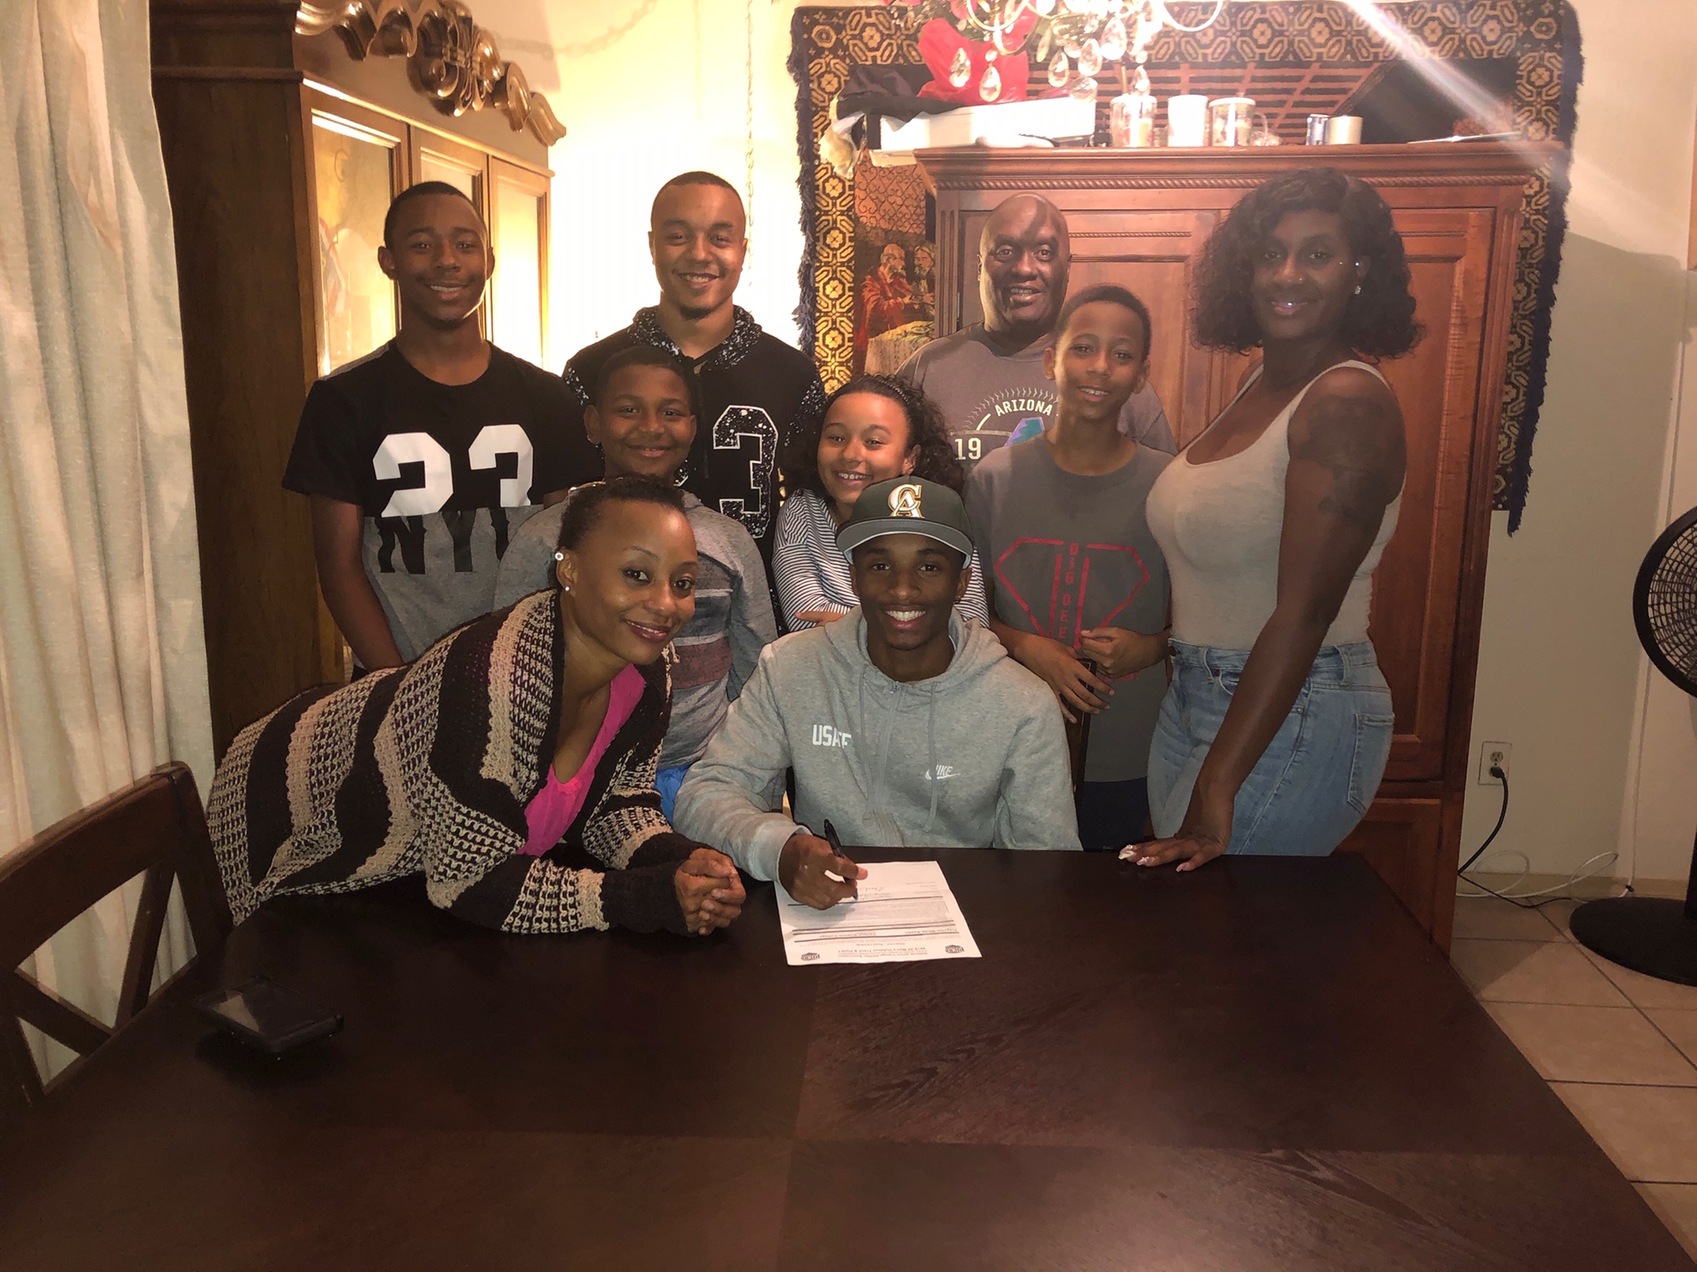 Travion White-Austin signs with Central Arizona College Track and Field